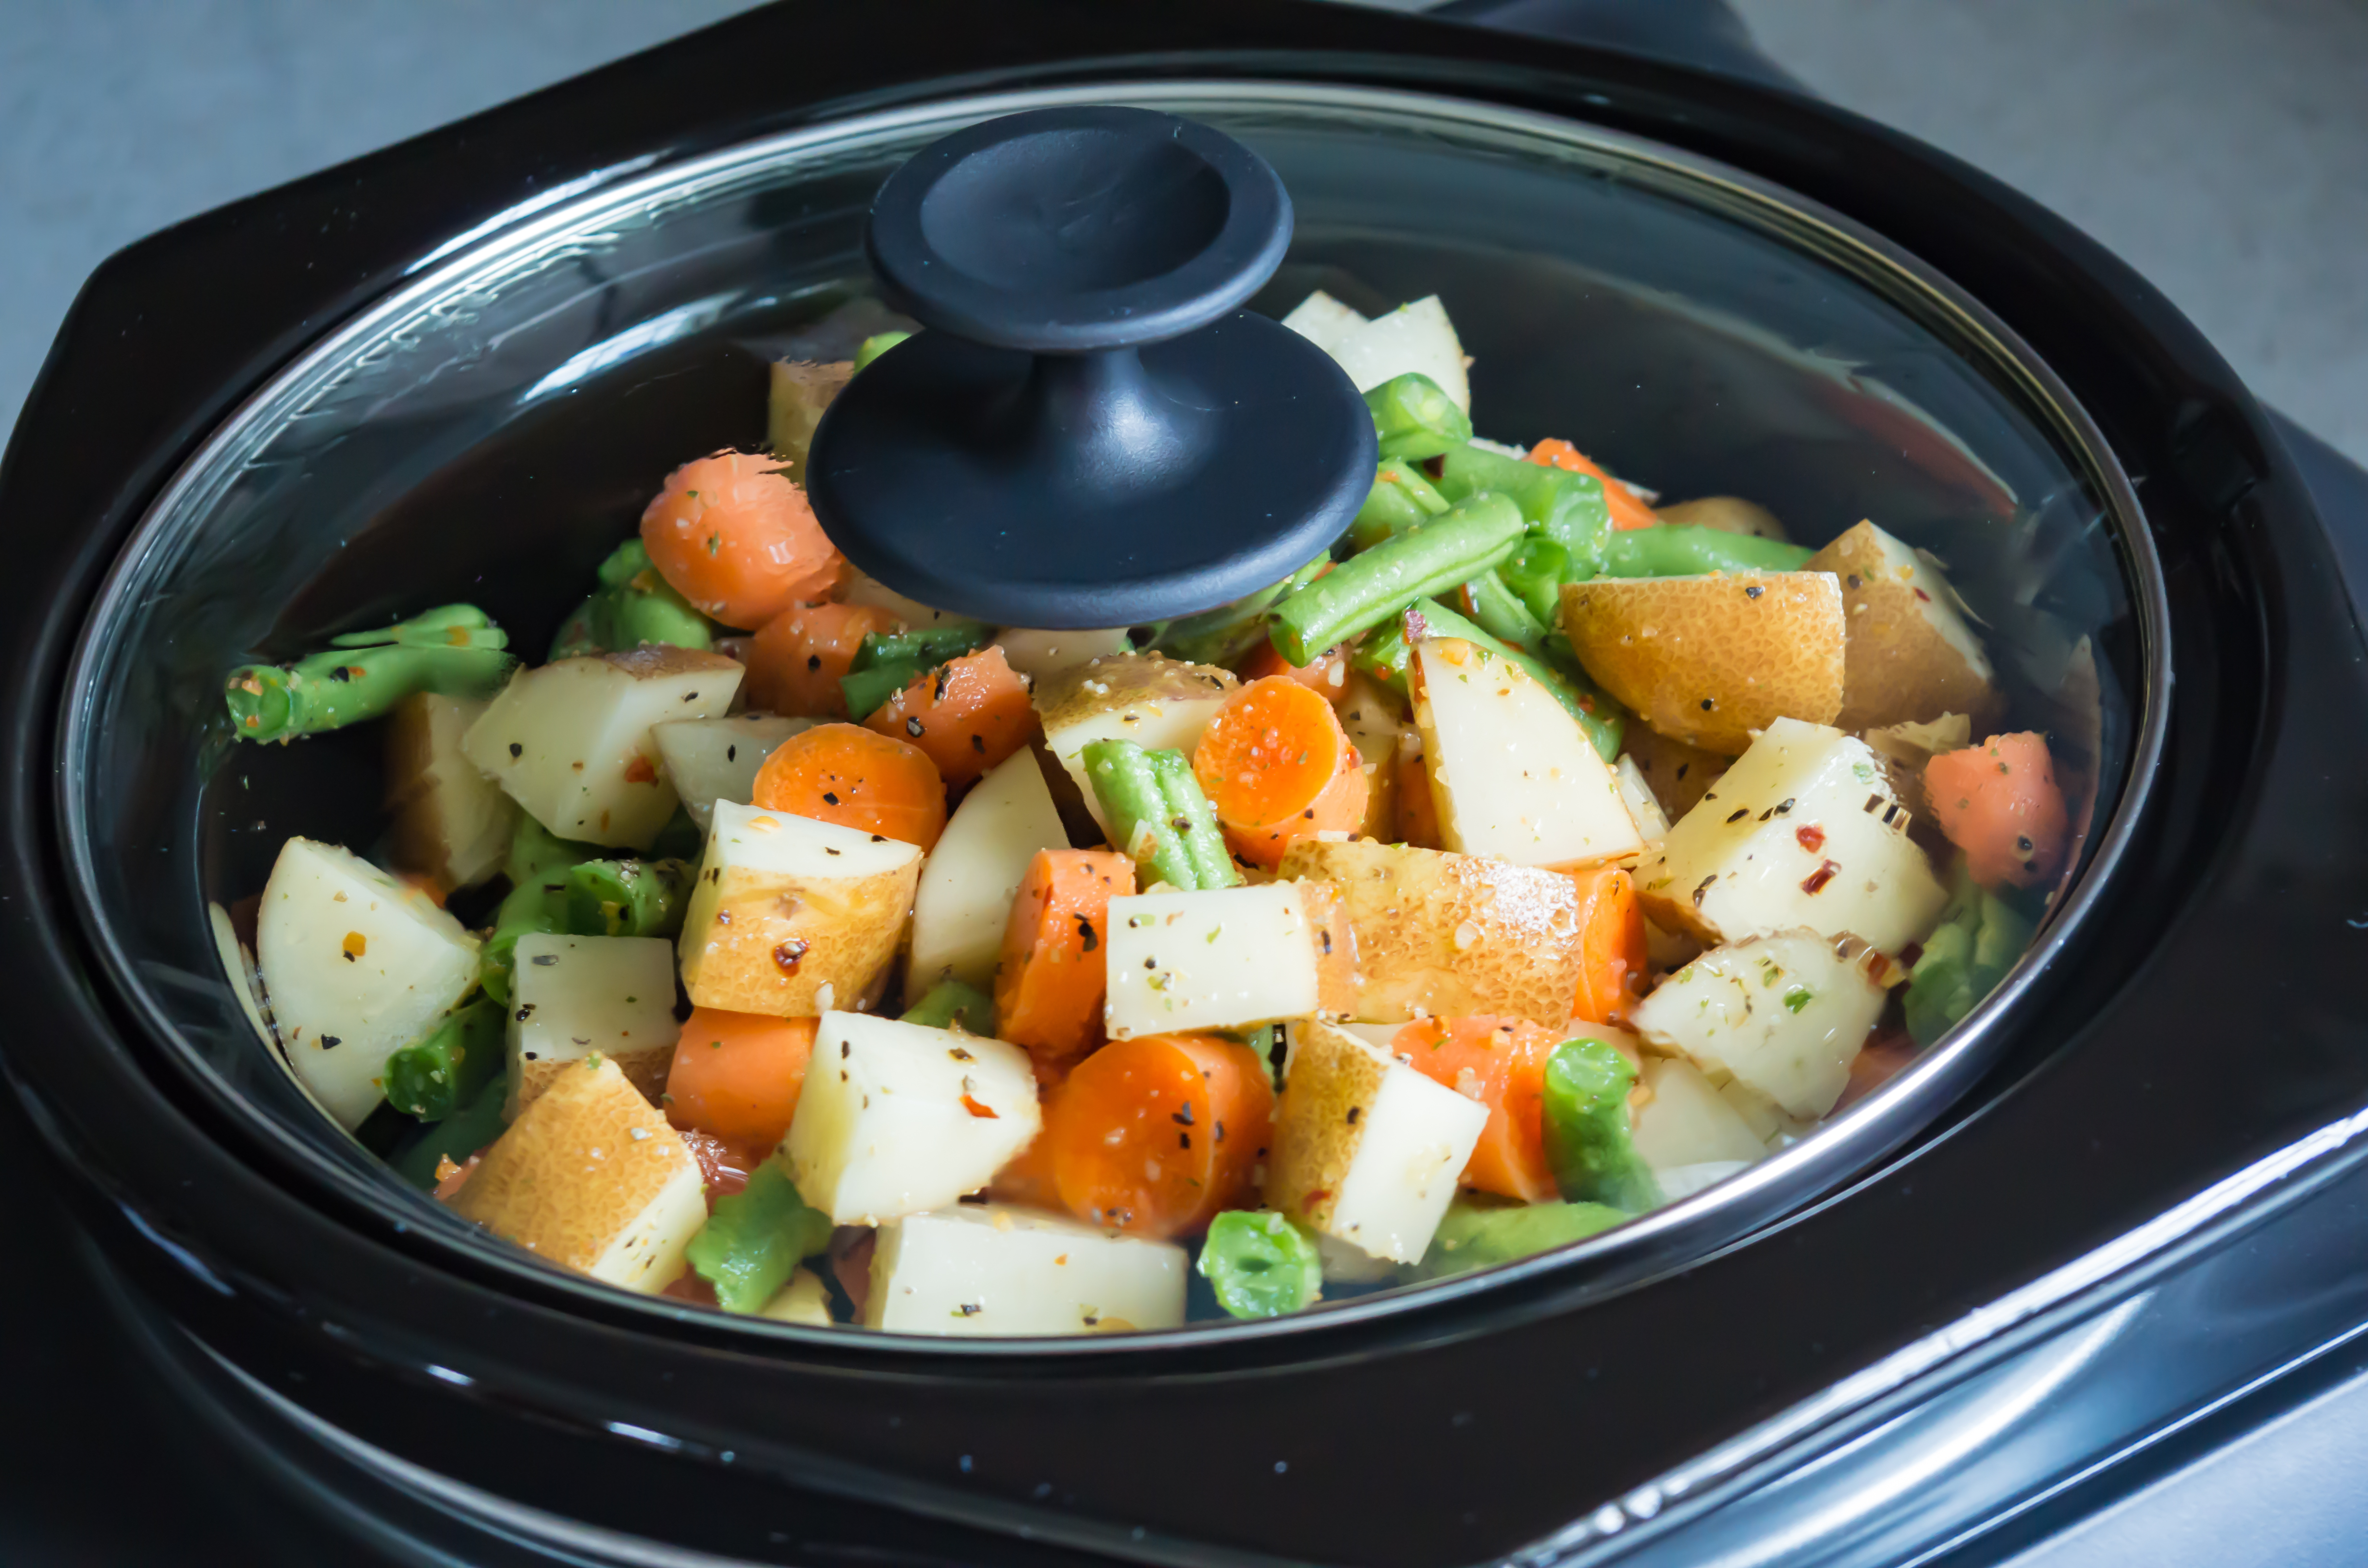 How to Reheat With a Crock-Pot